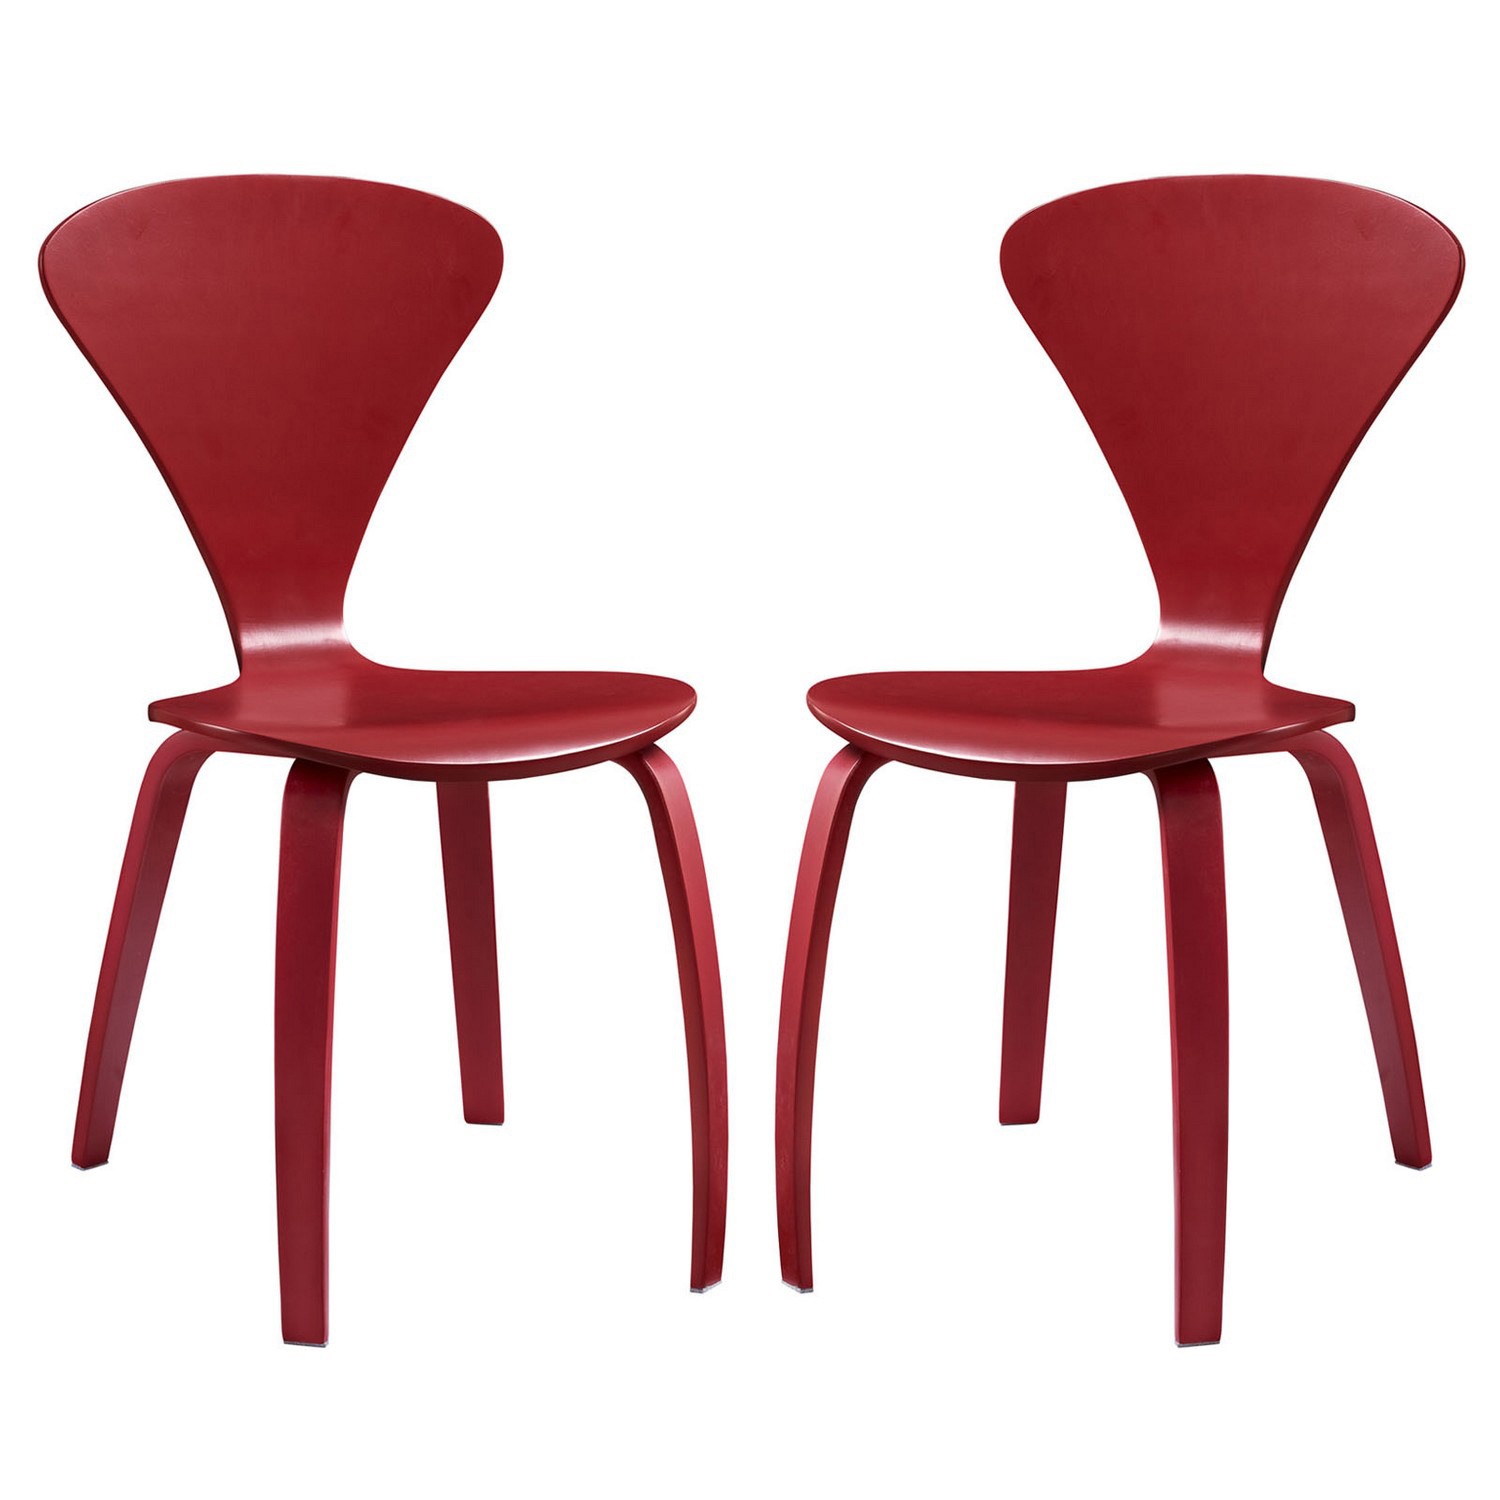 Modway Vortex Dining Chairs Set of 2 - Red